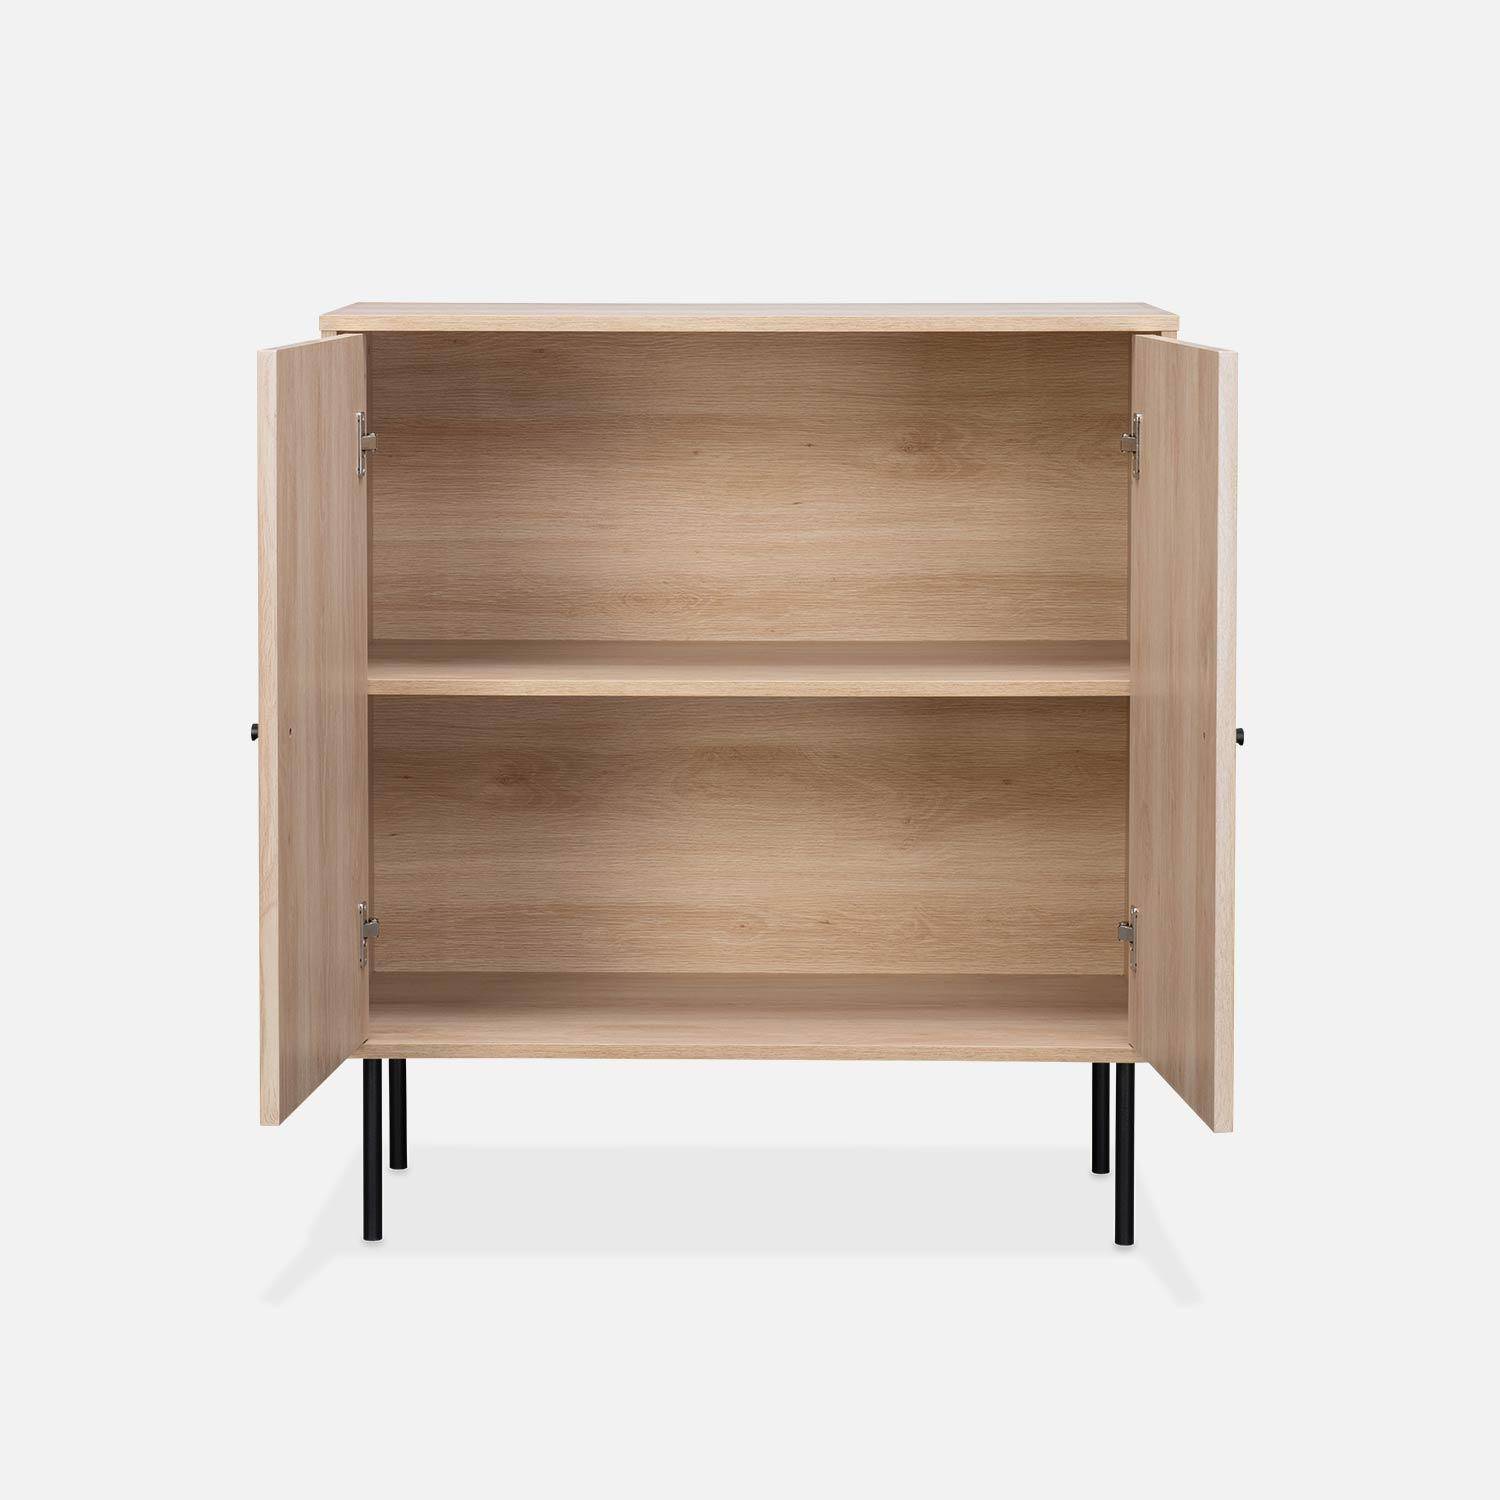 Grooved wood-effect storage cabinet with two doors and one shelf, 83.5x39x92.5cm - Braga - Natural Photo6